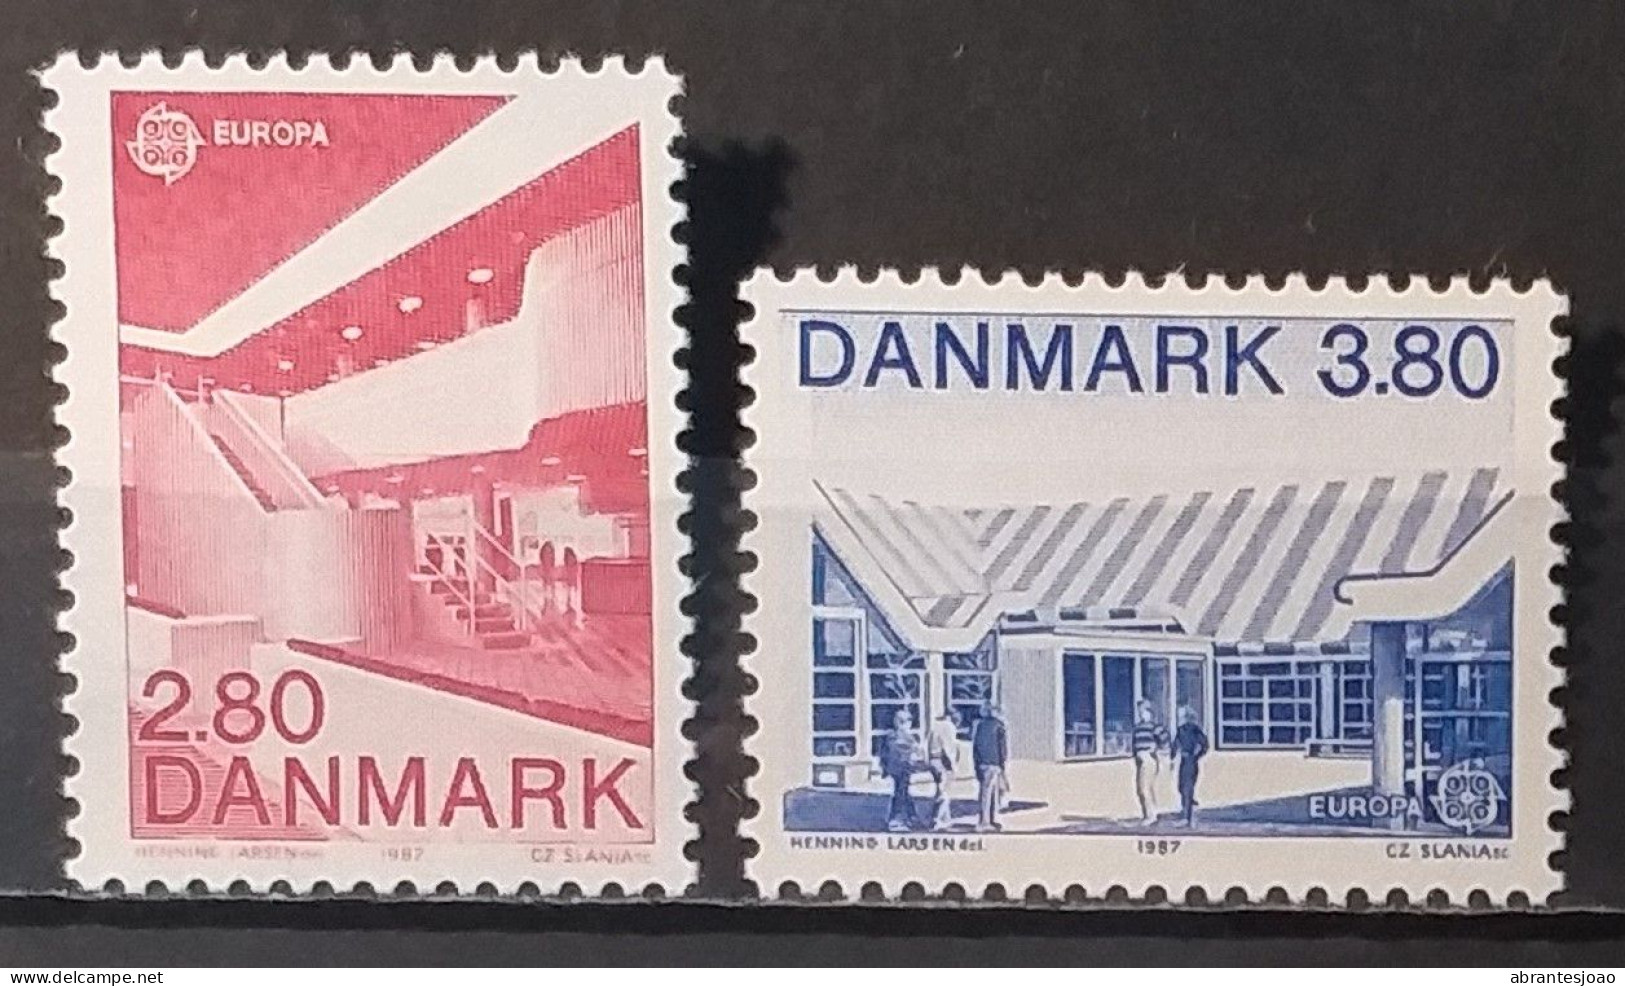 1984 - Denmark - MNH - Europa CEPT - 25 Years Of CEPT + 1987- ModernArchitecture - 4 Stamps - Neufs